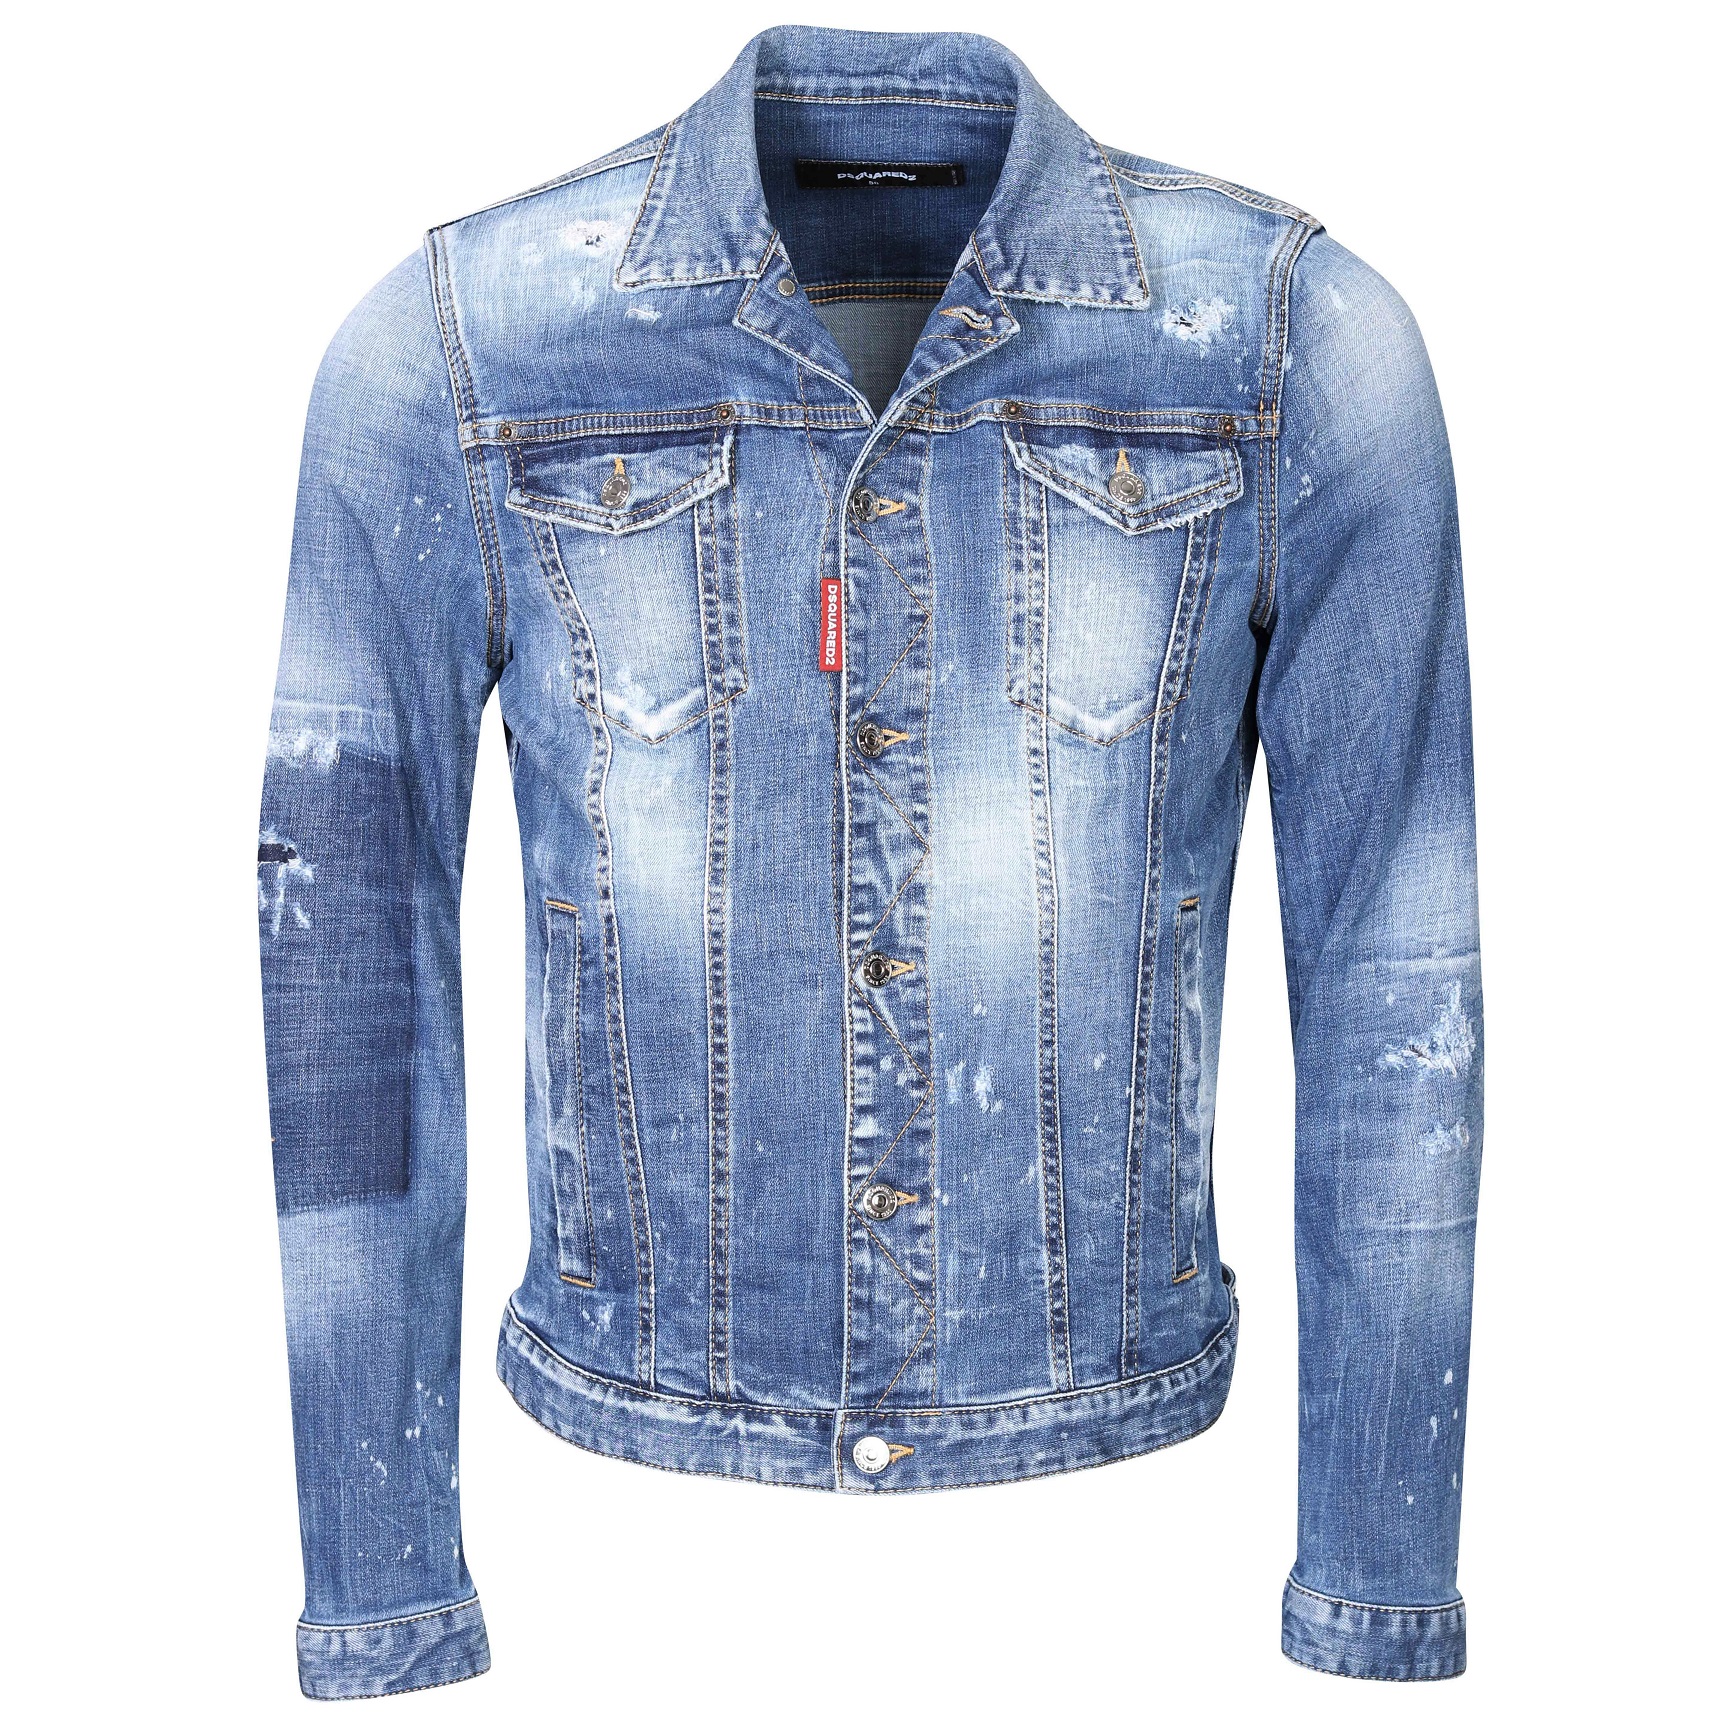 DSQUARED2 Classic Denim Jacket in Washed Light Blue